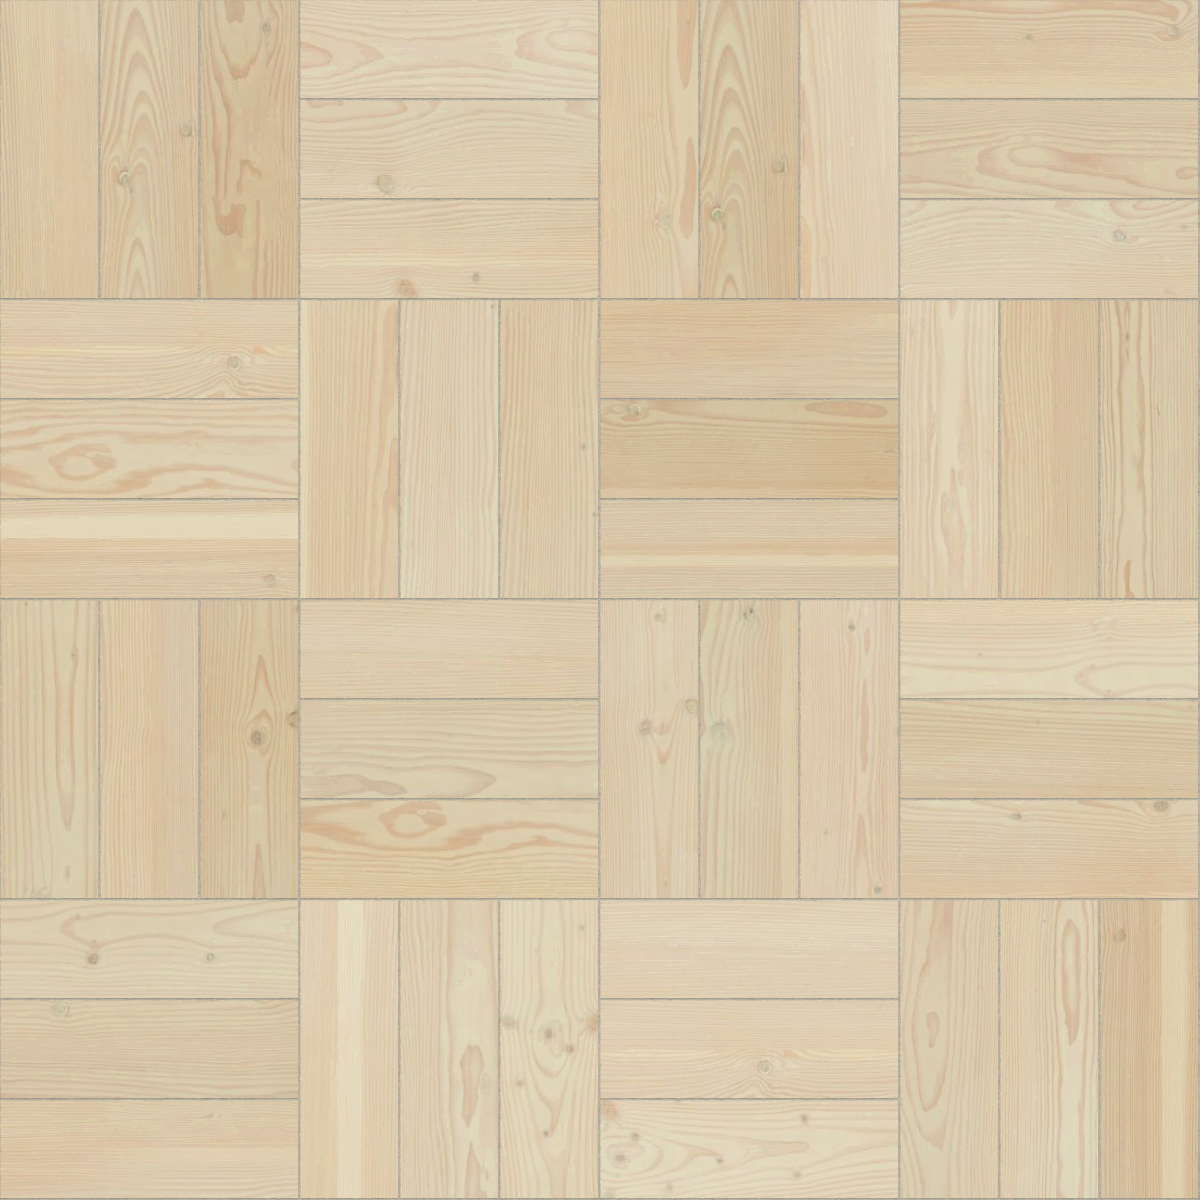 A seamless wood texture with douglas fir boards arranged in a Basketweave pattern